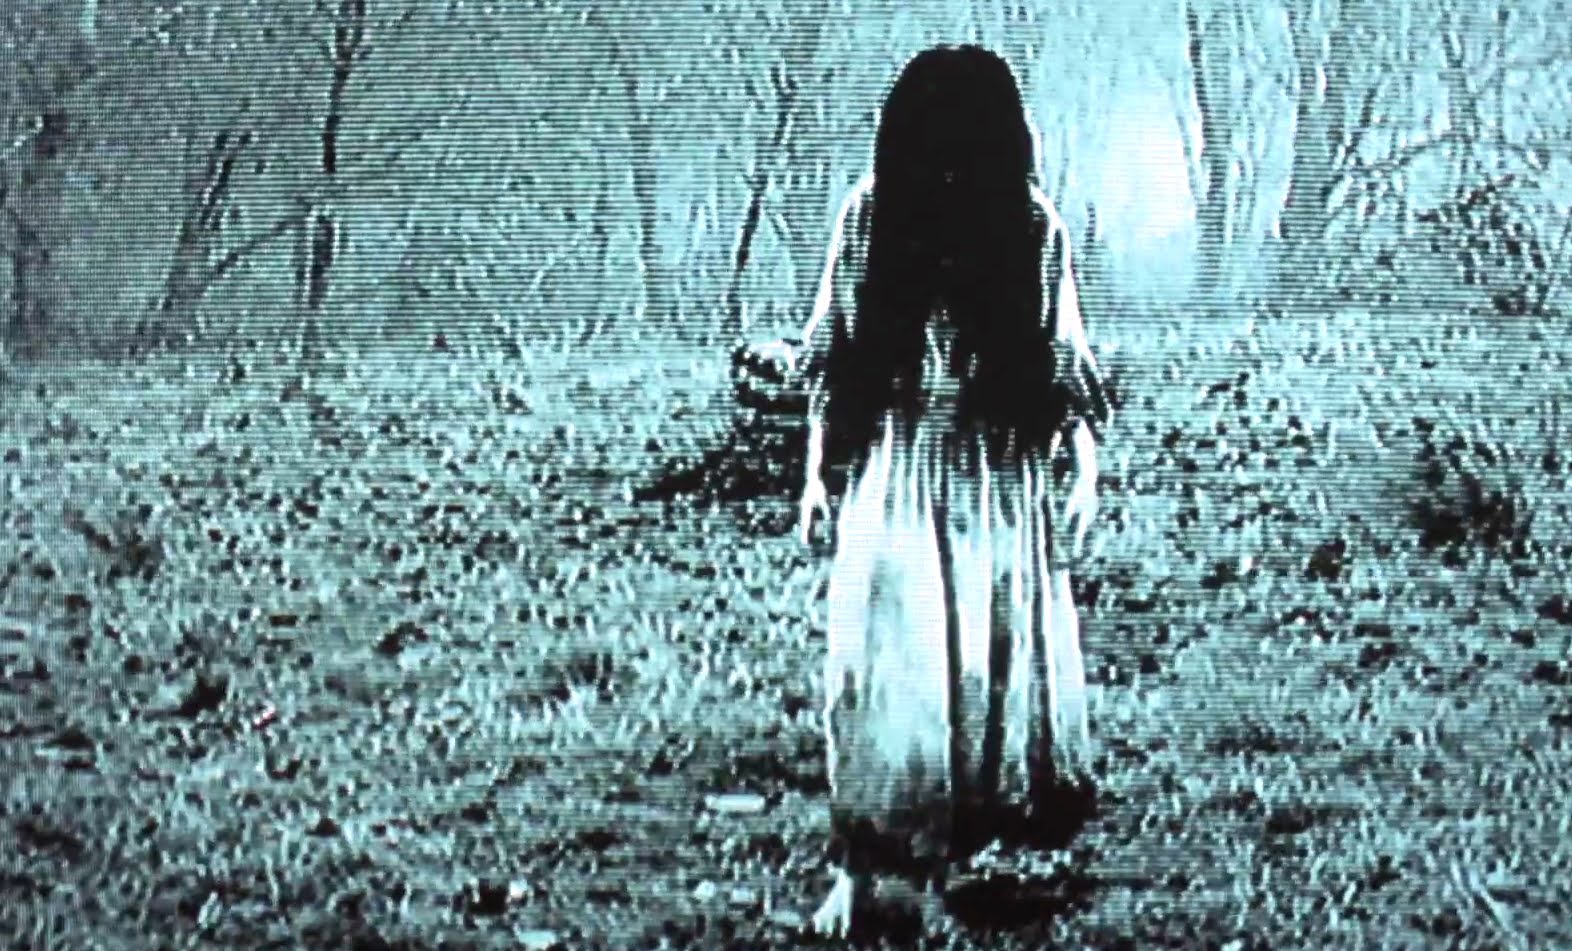 Looking for the craziest, creepiest Rings movie quotes? Check out these five lines from the movie that will make your hair stand on end!